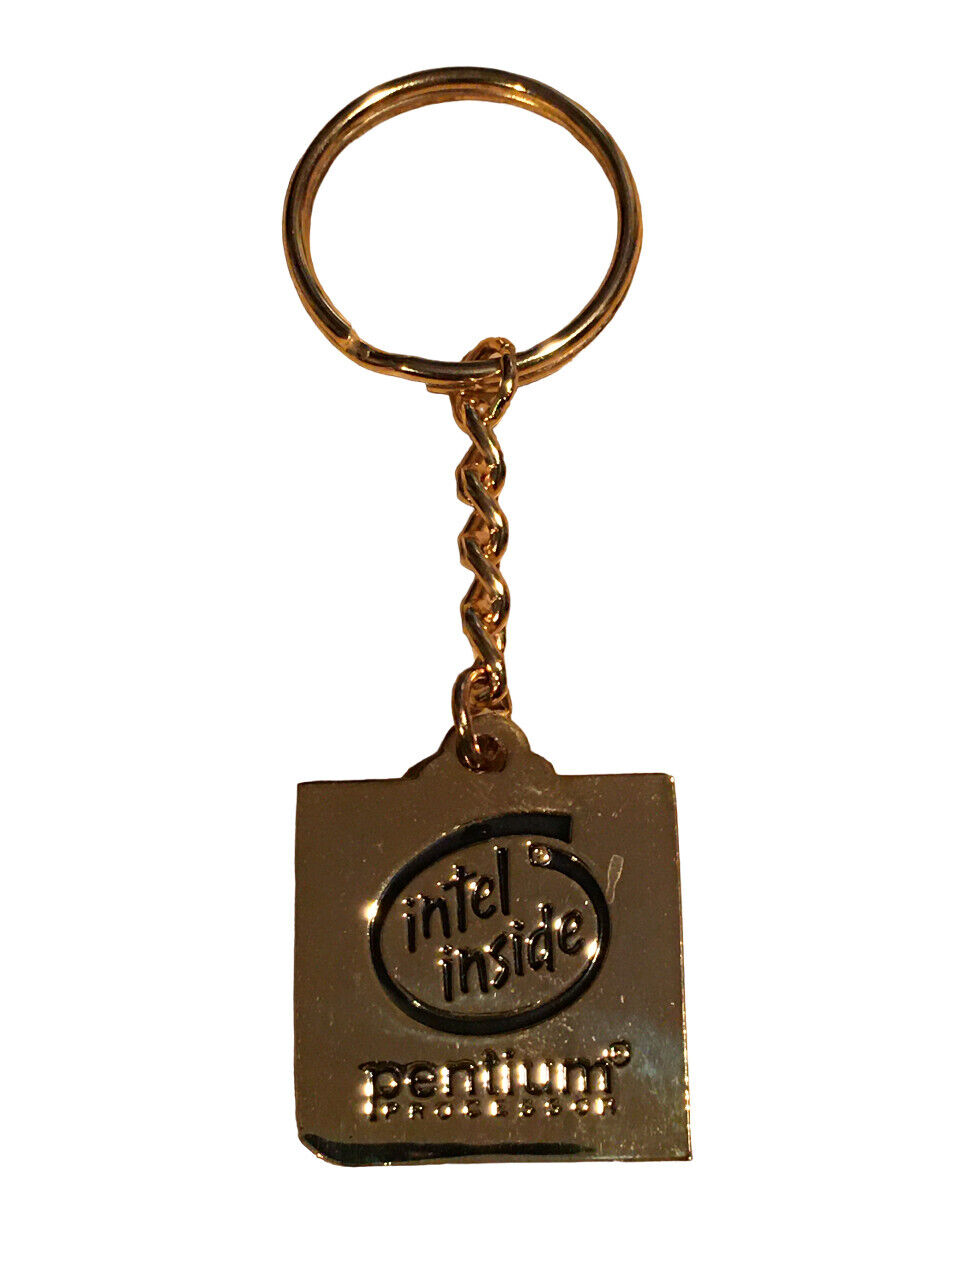 Vintage 1990's Intel Inside Pentium Processor Key Chain With Embedded CPU Chip